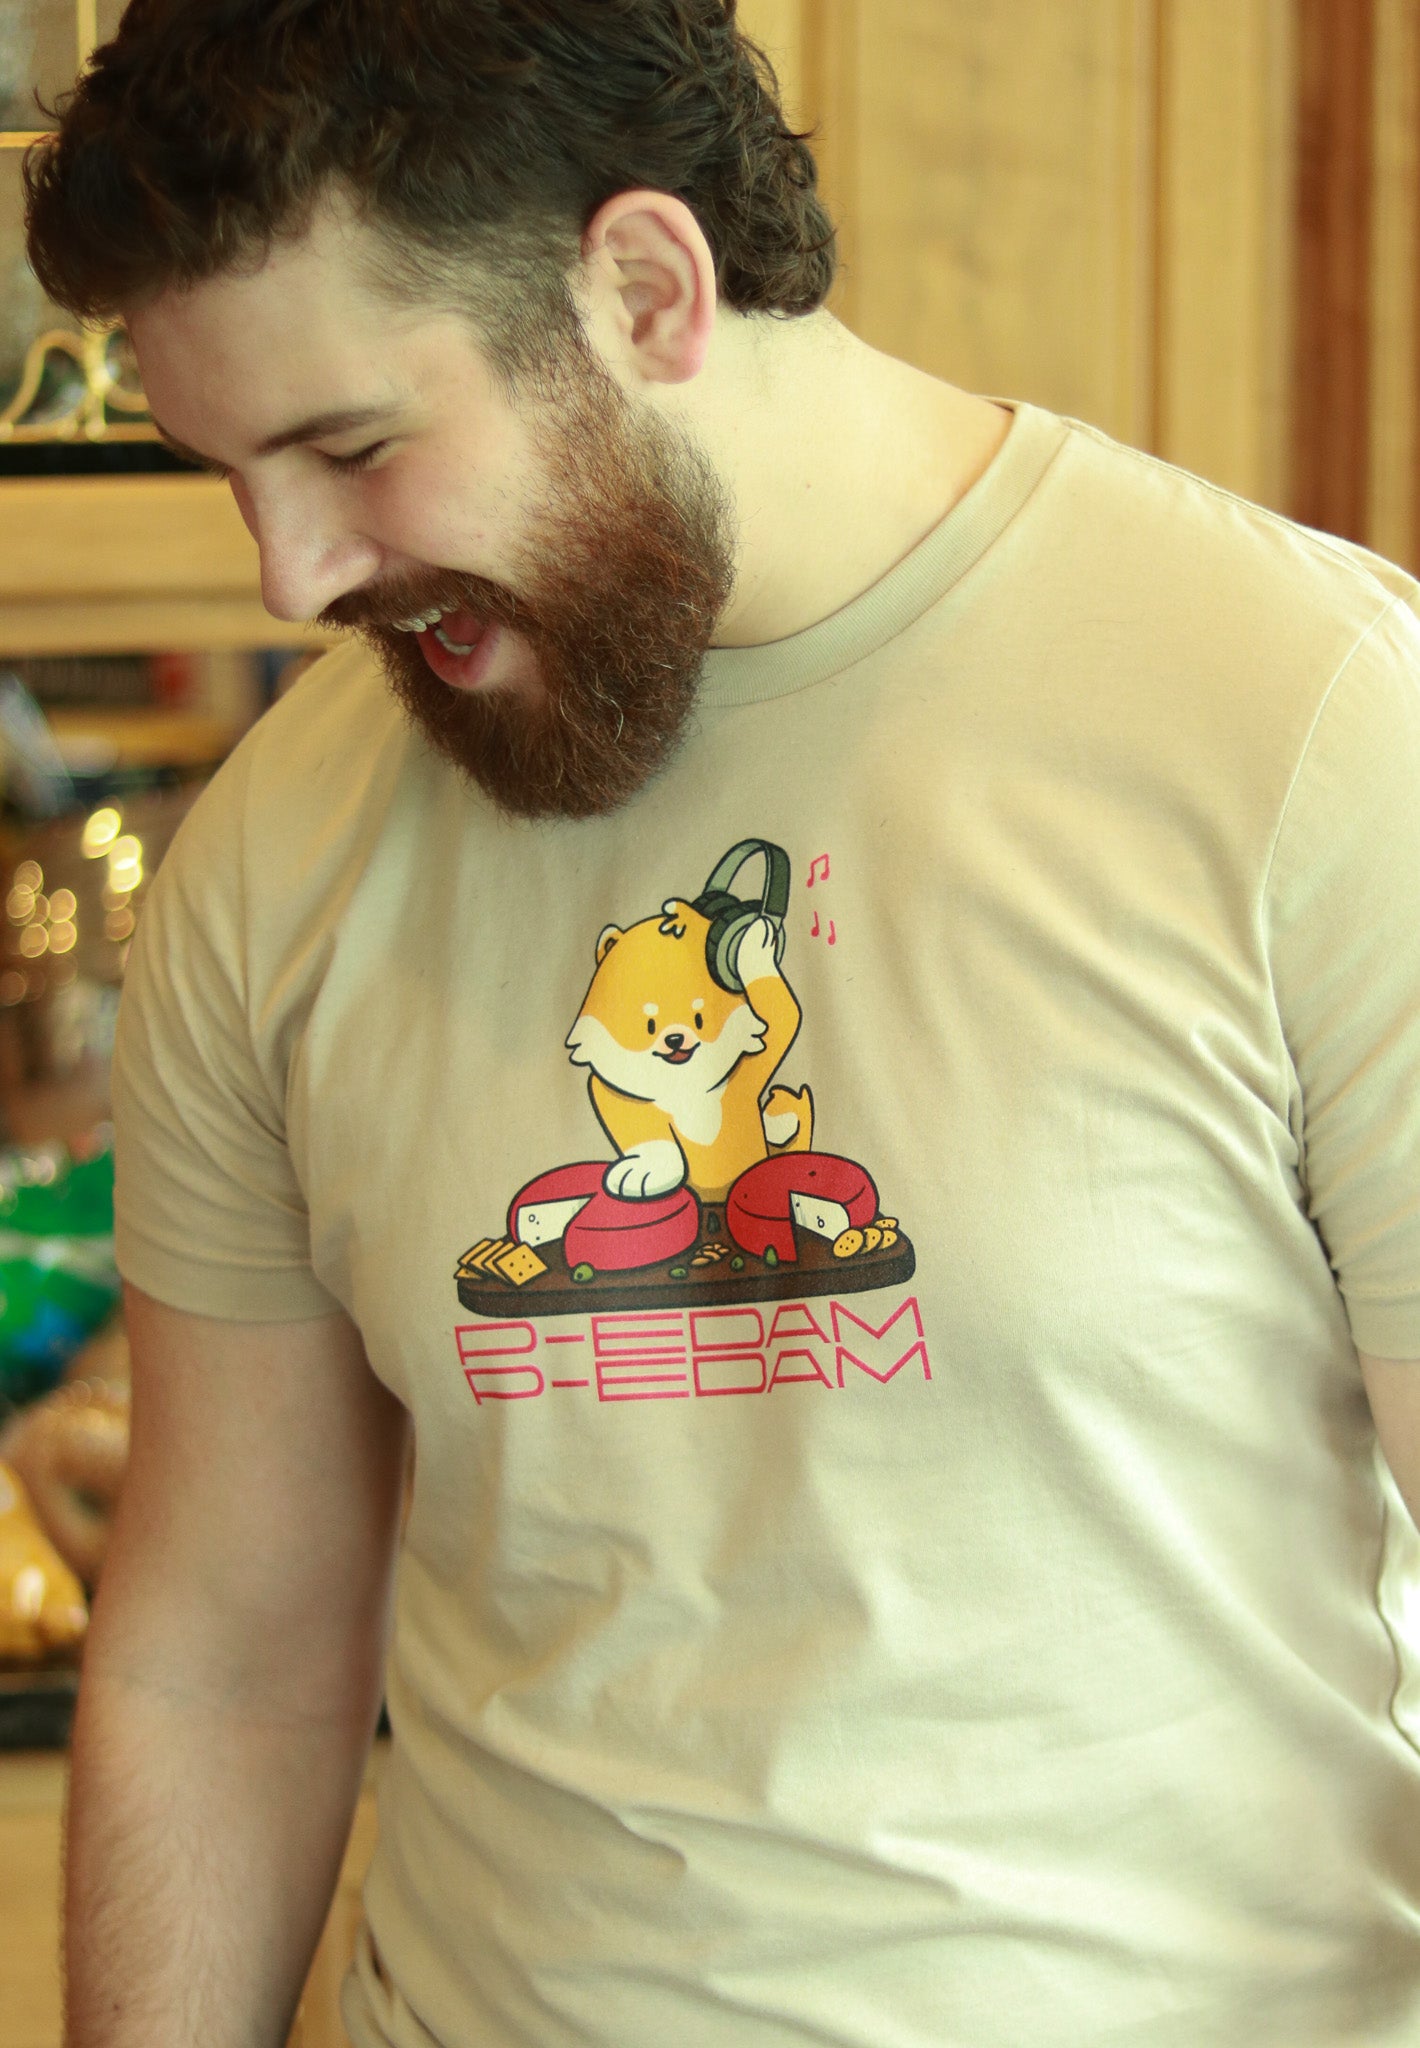 bearded person in kitchen wear tan P-Edam t-shirt featuring illustration of Pomeranian playing two wheels of edam cheese like DJ tables on a charcuterie 